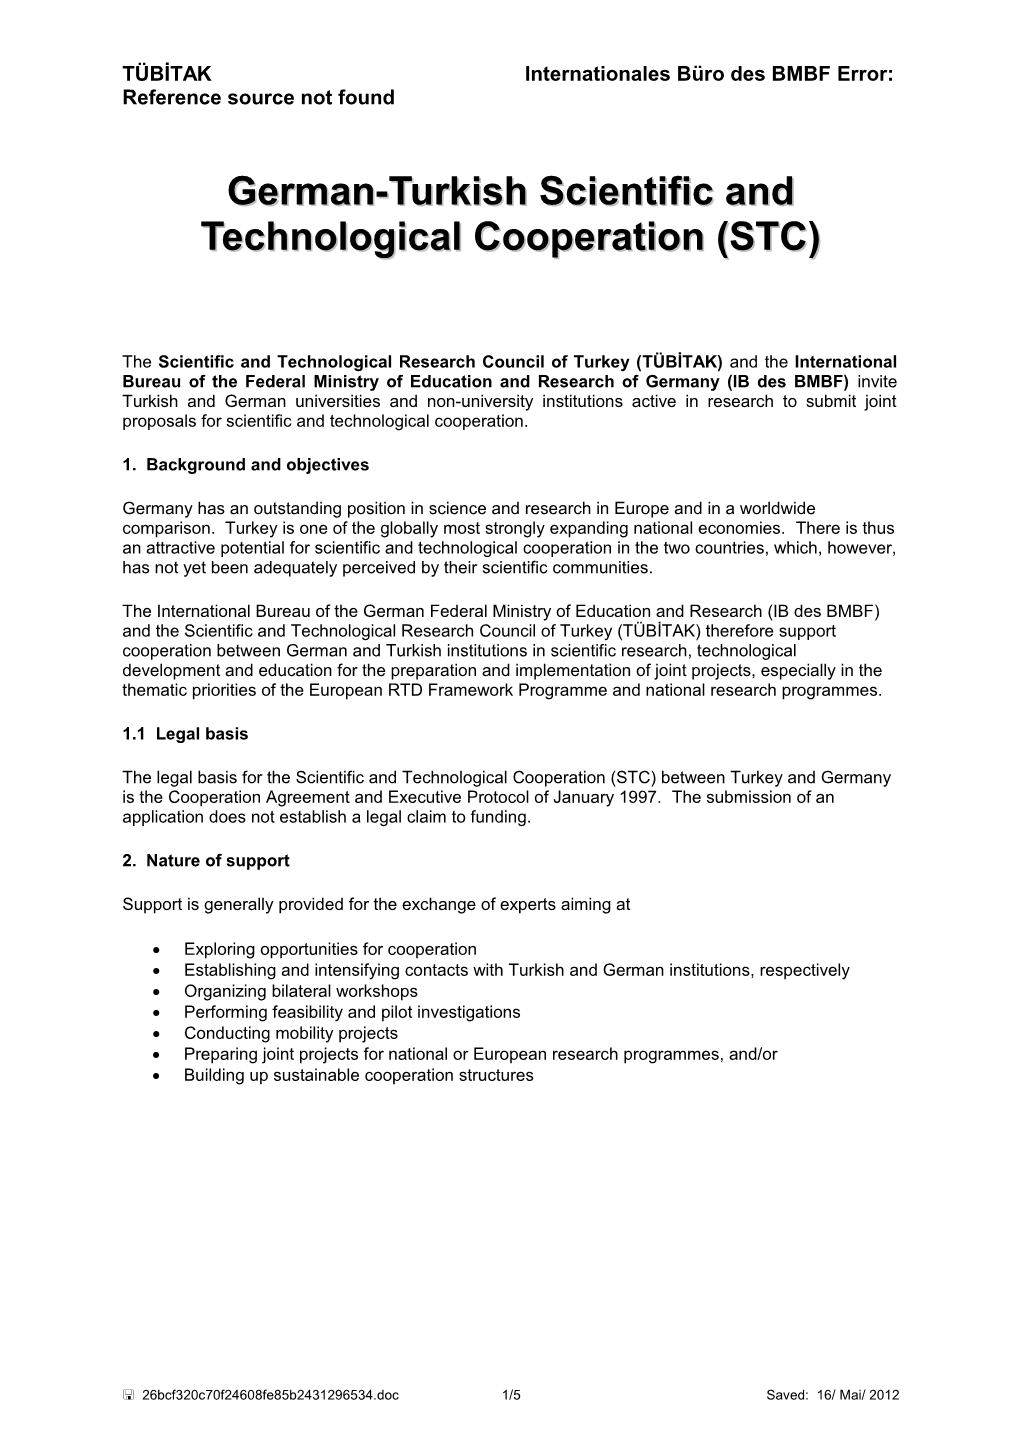 German-Turkish Scientific and Technological Cooperation (STC)